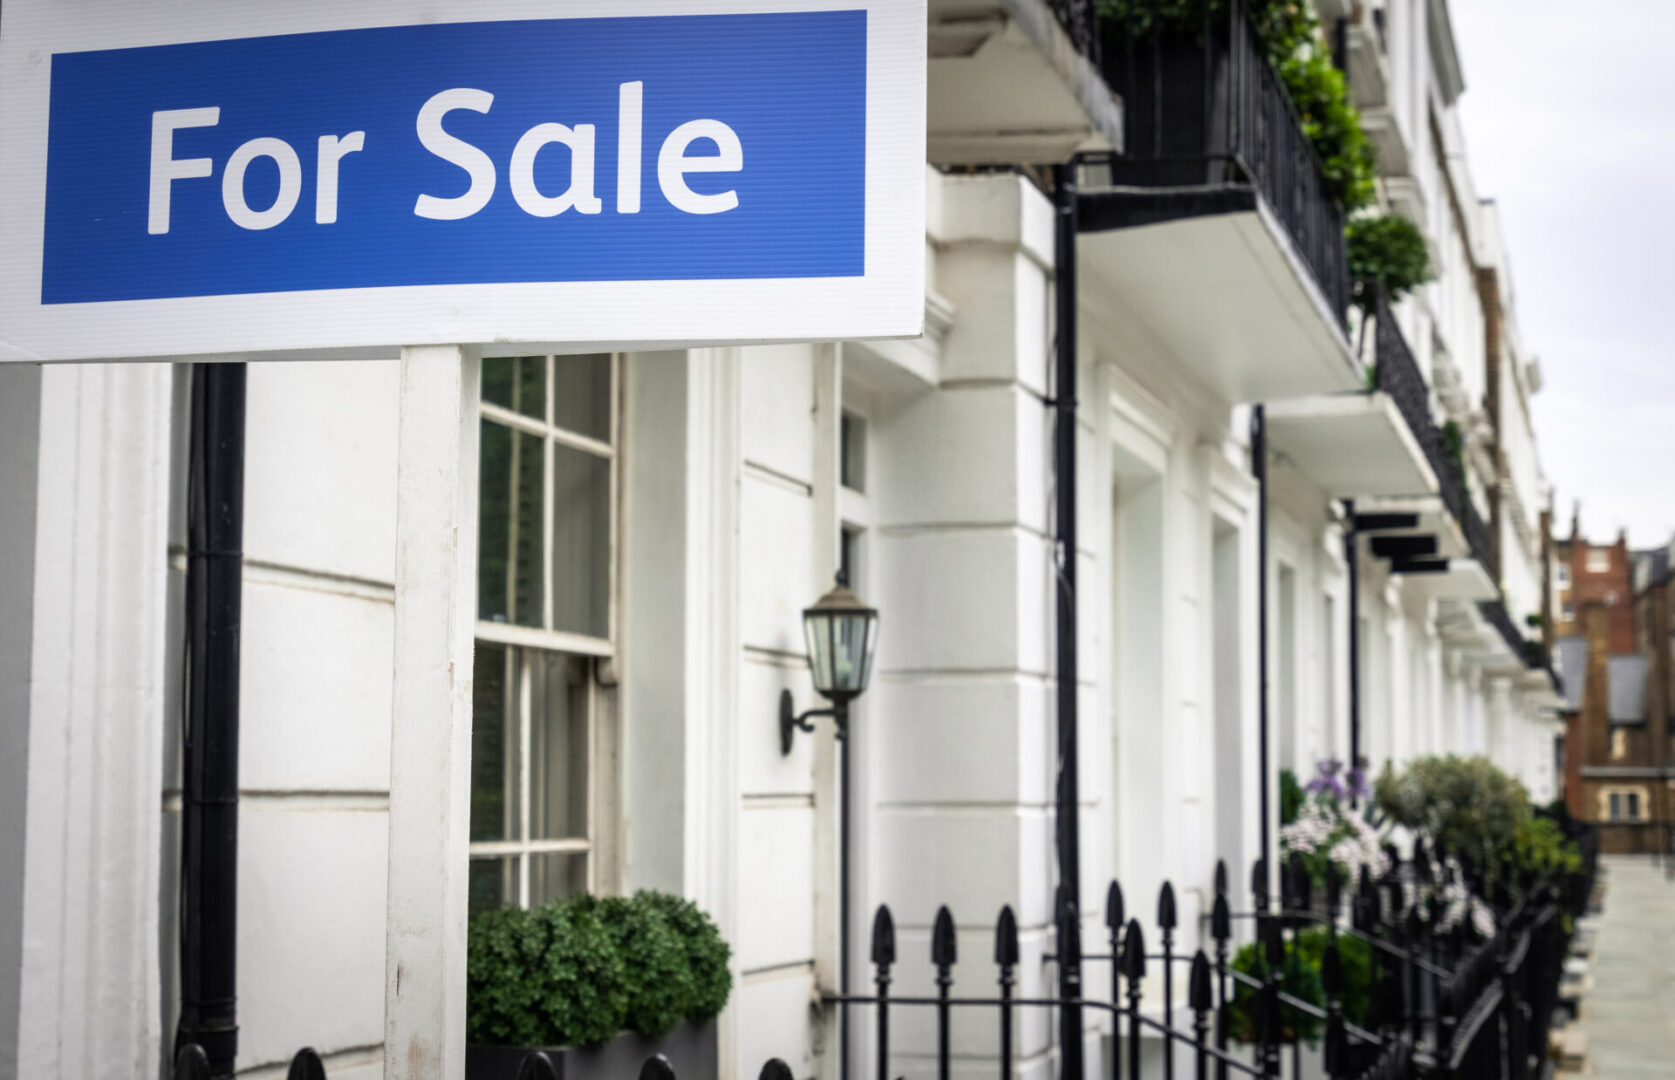 UK House Prices Boost